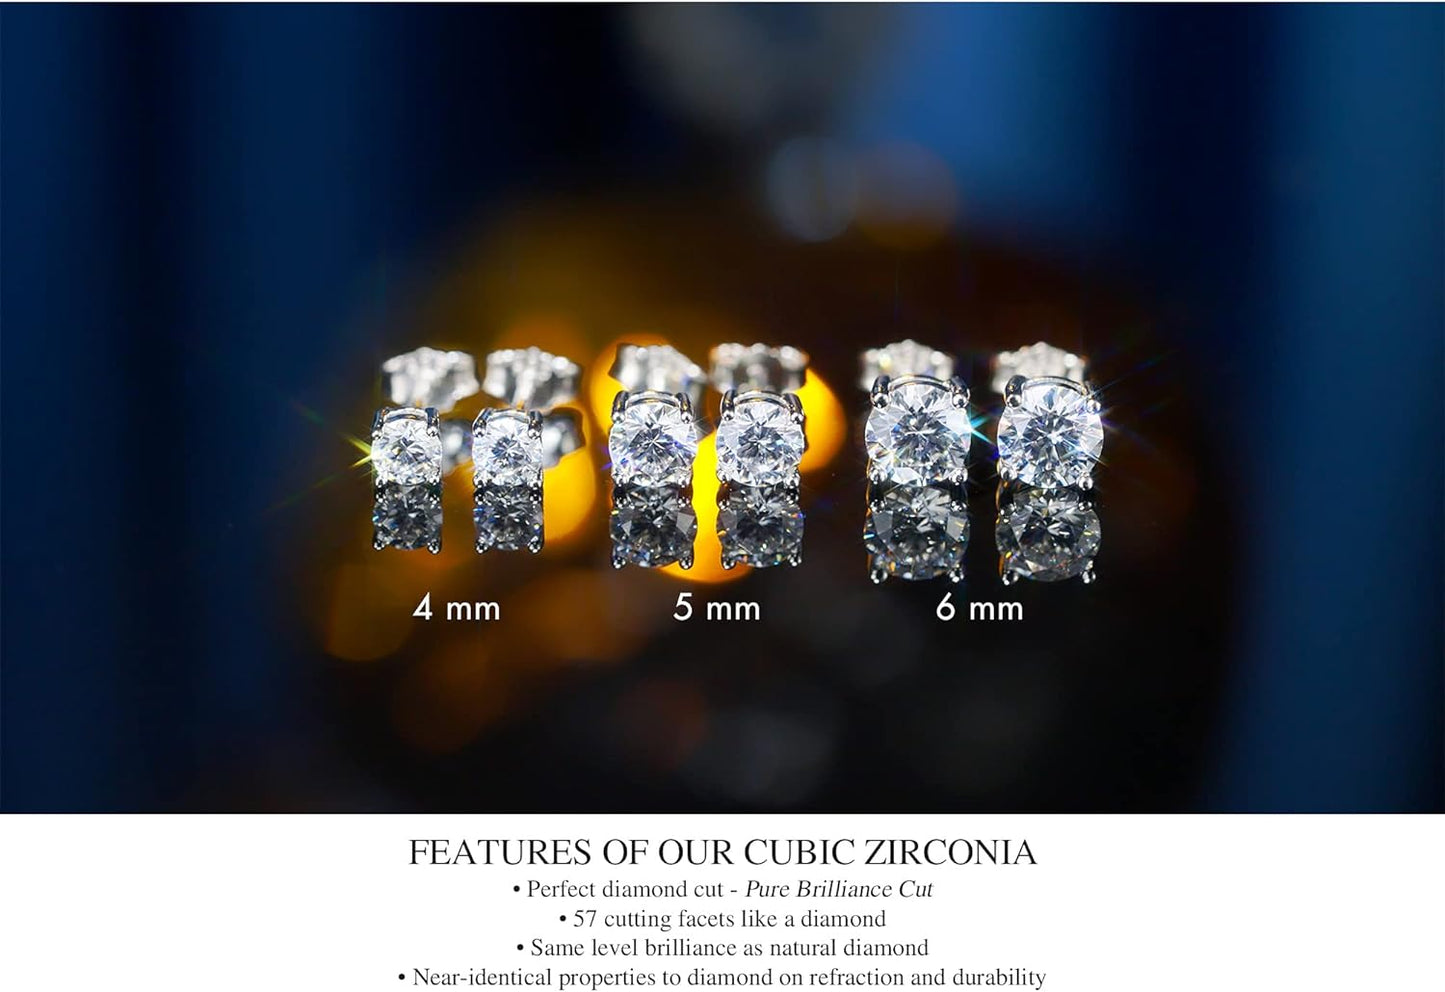 Dazzle and Delight: 925 Sterling Silver Stud Earrings with Austria's Finest Cubic Zirconia – Unleash Brilliance in Every Size